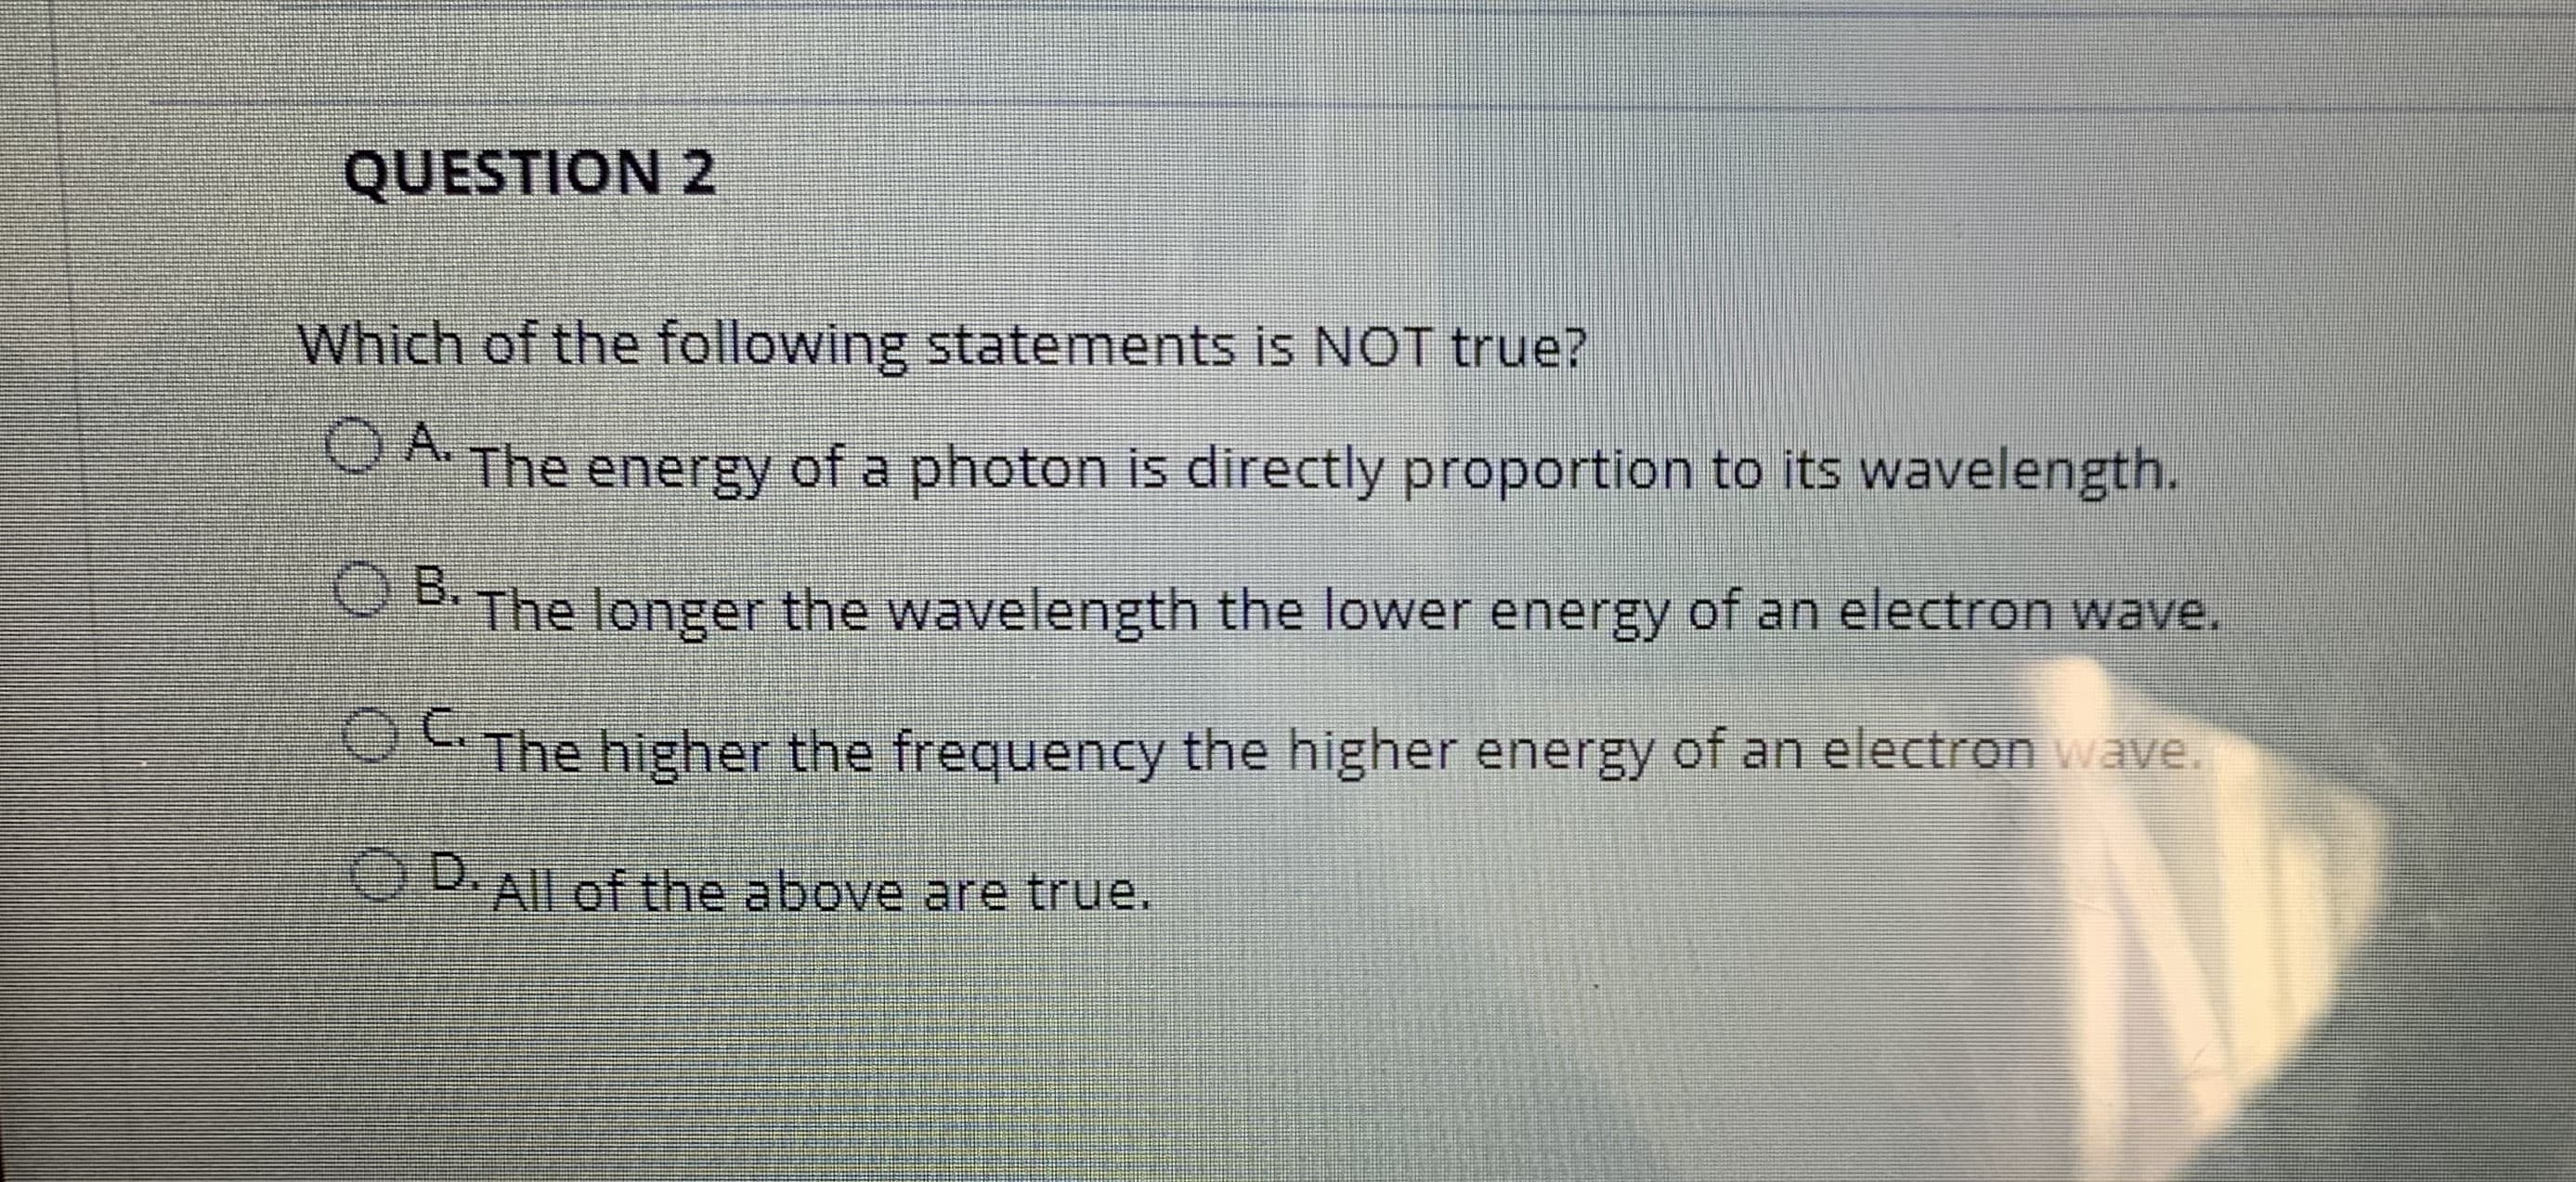 Which of the following statements is NOT true?
OA.
The energy of a photon is directly proportion to its wavelength.
OB.
PThe longer the wavelength the lower energy of an electron wave.
